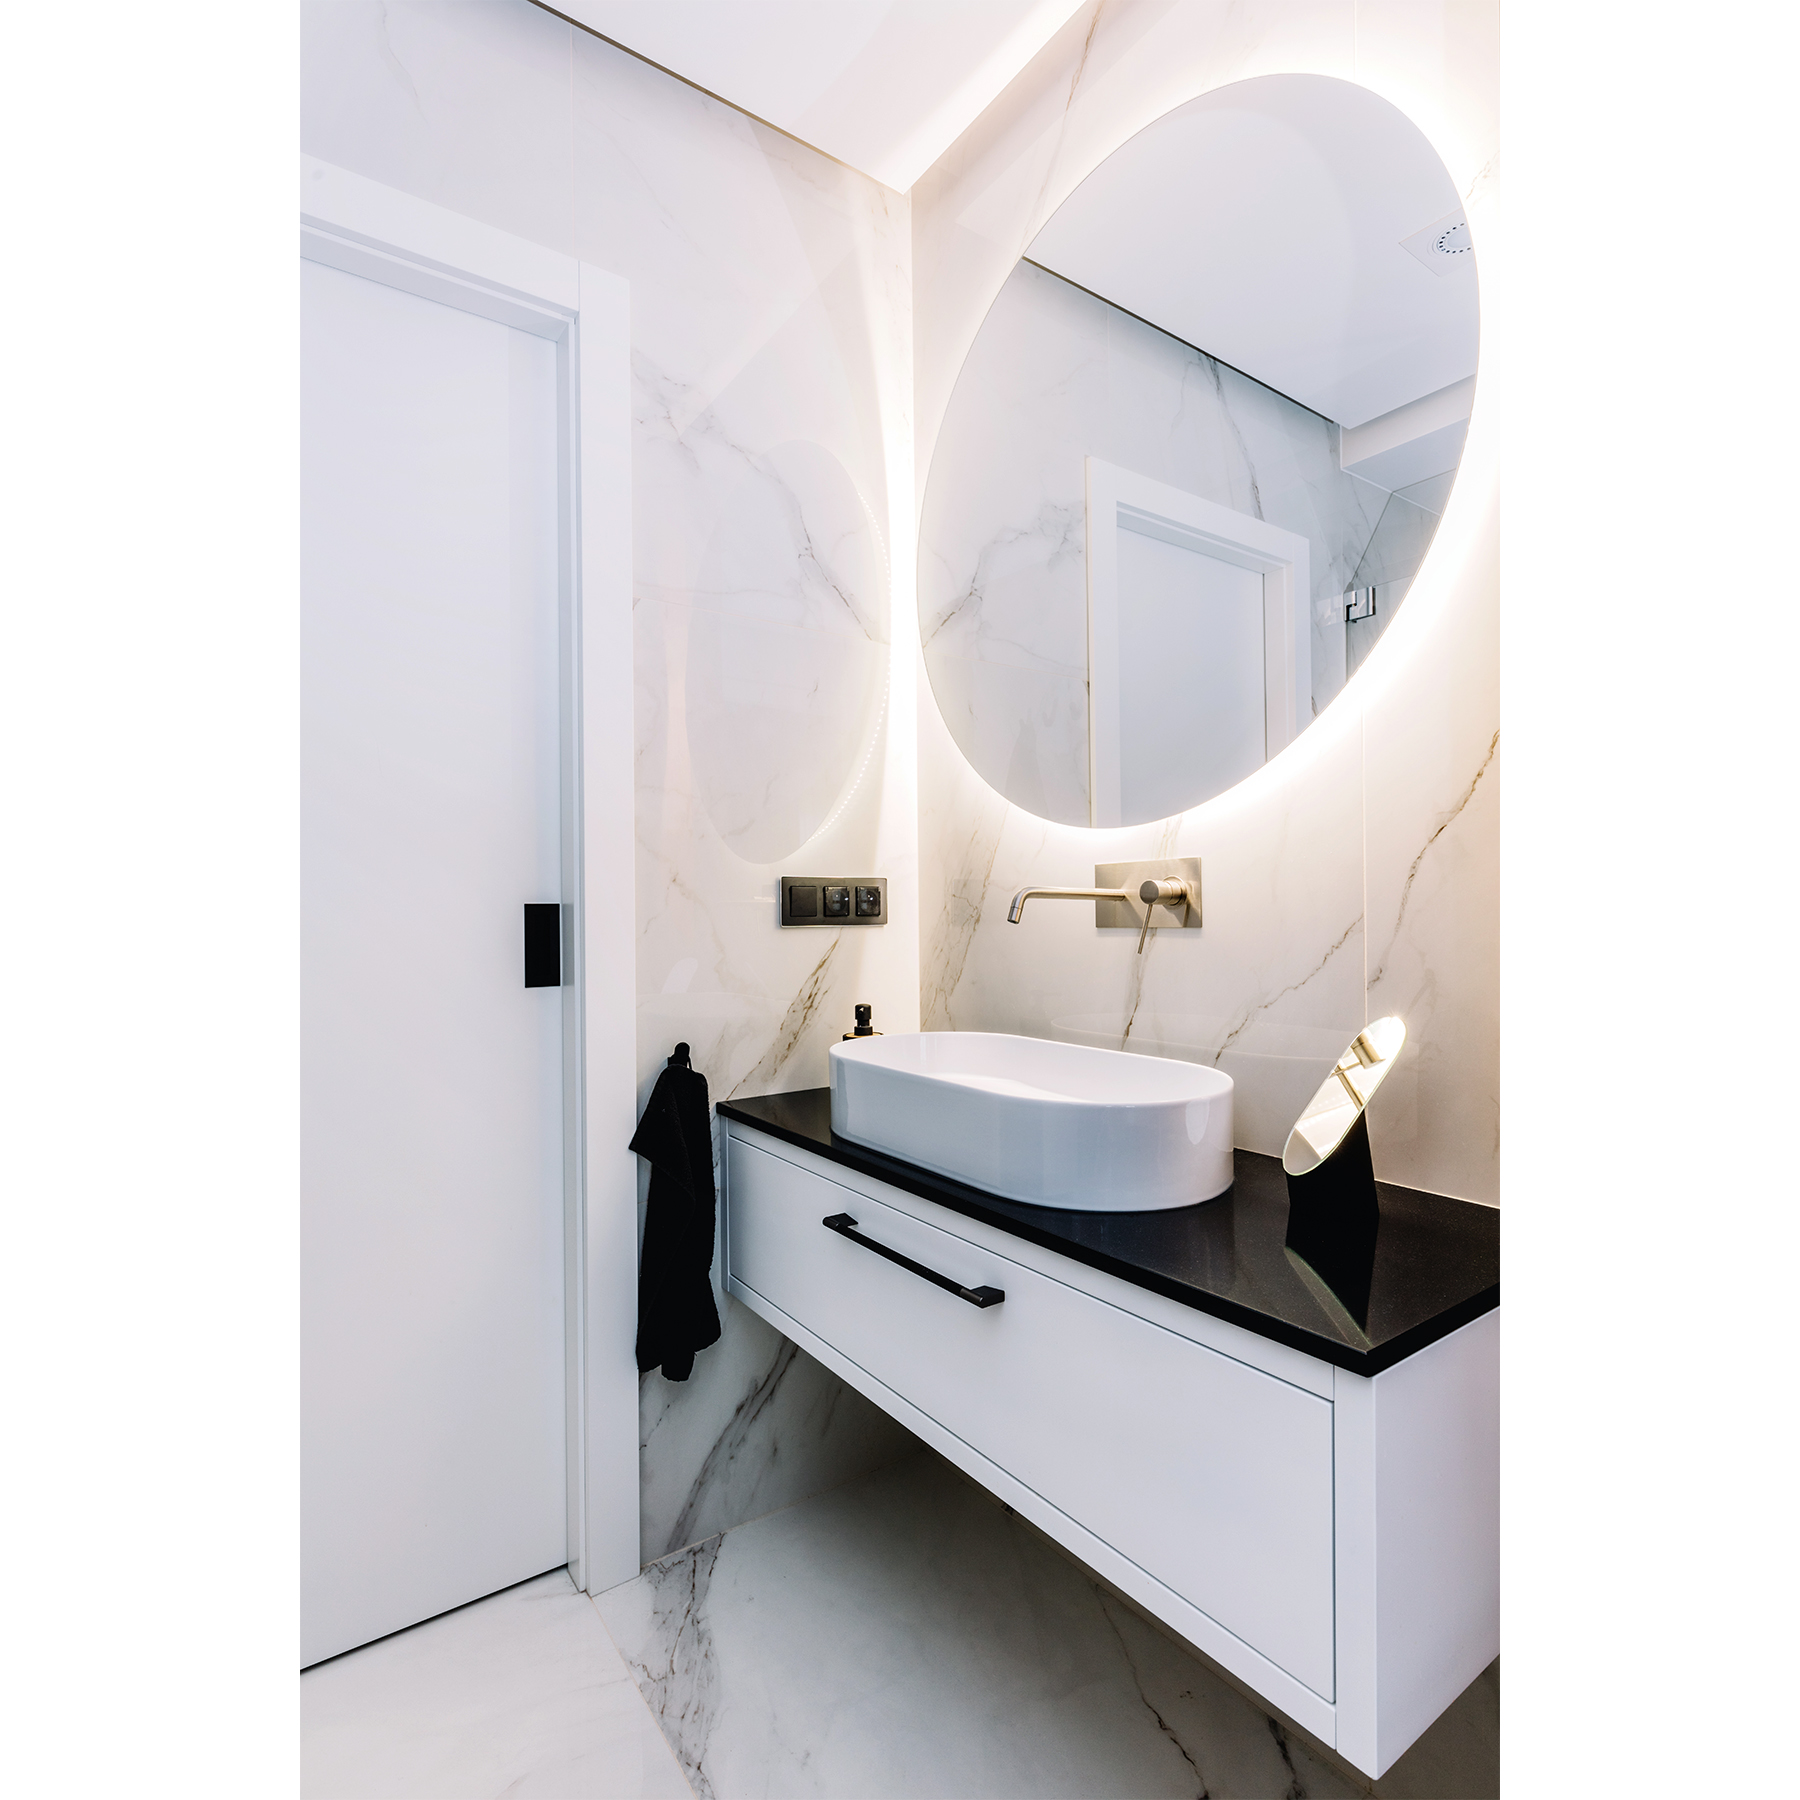 https://www.twowaymirrors.com/wp-content/uploads/2020/11/LED-Lights-Placed-Behind-A-Custom-Mirror.jpg